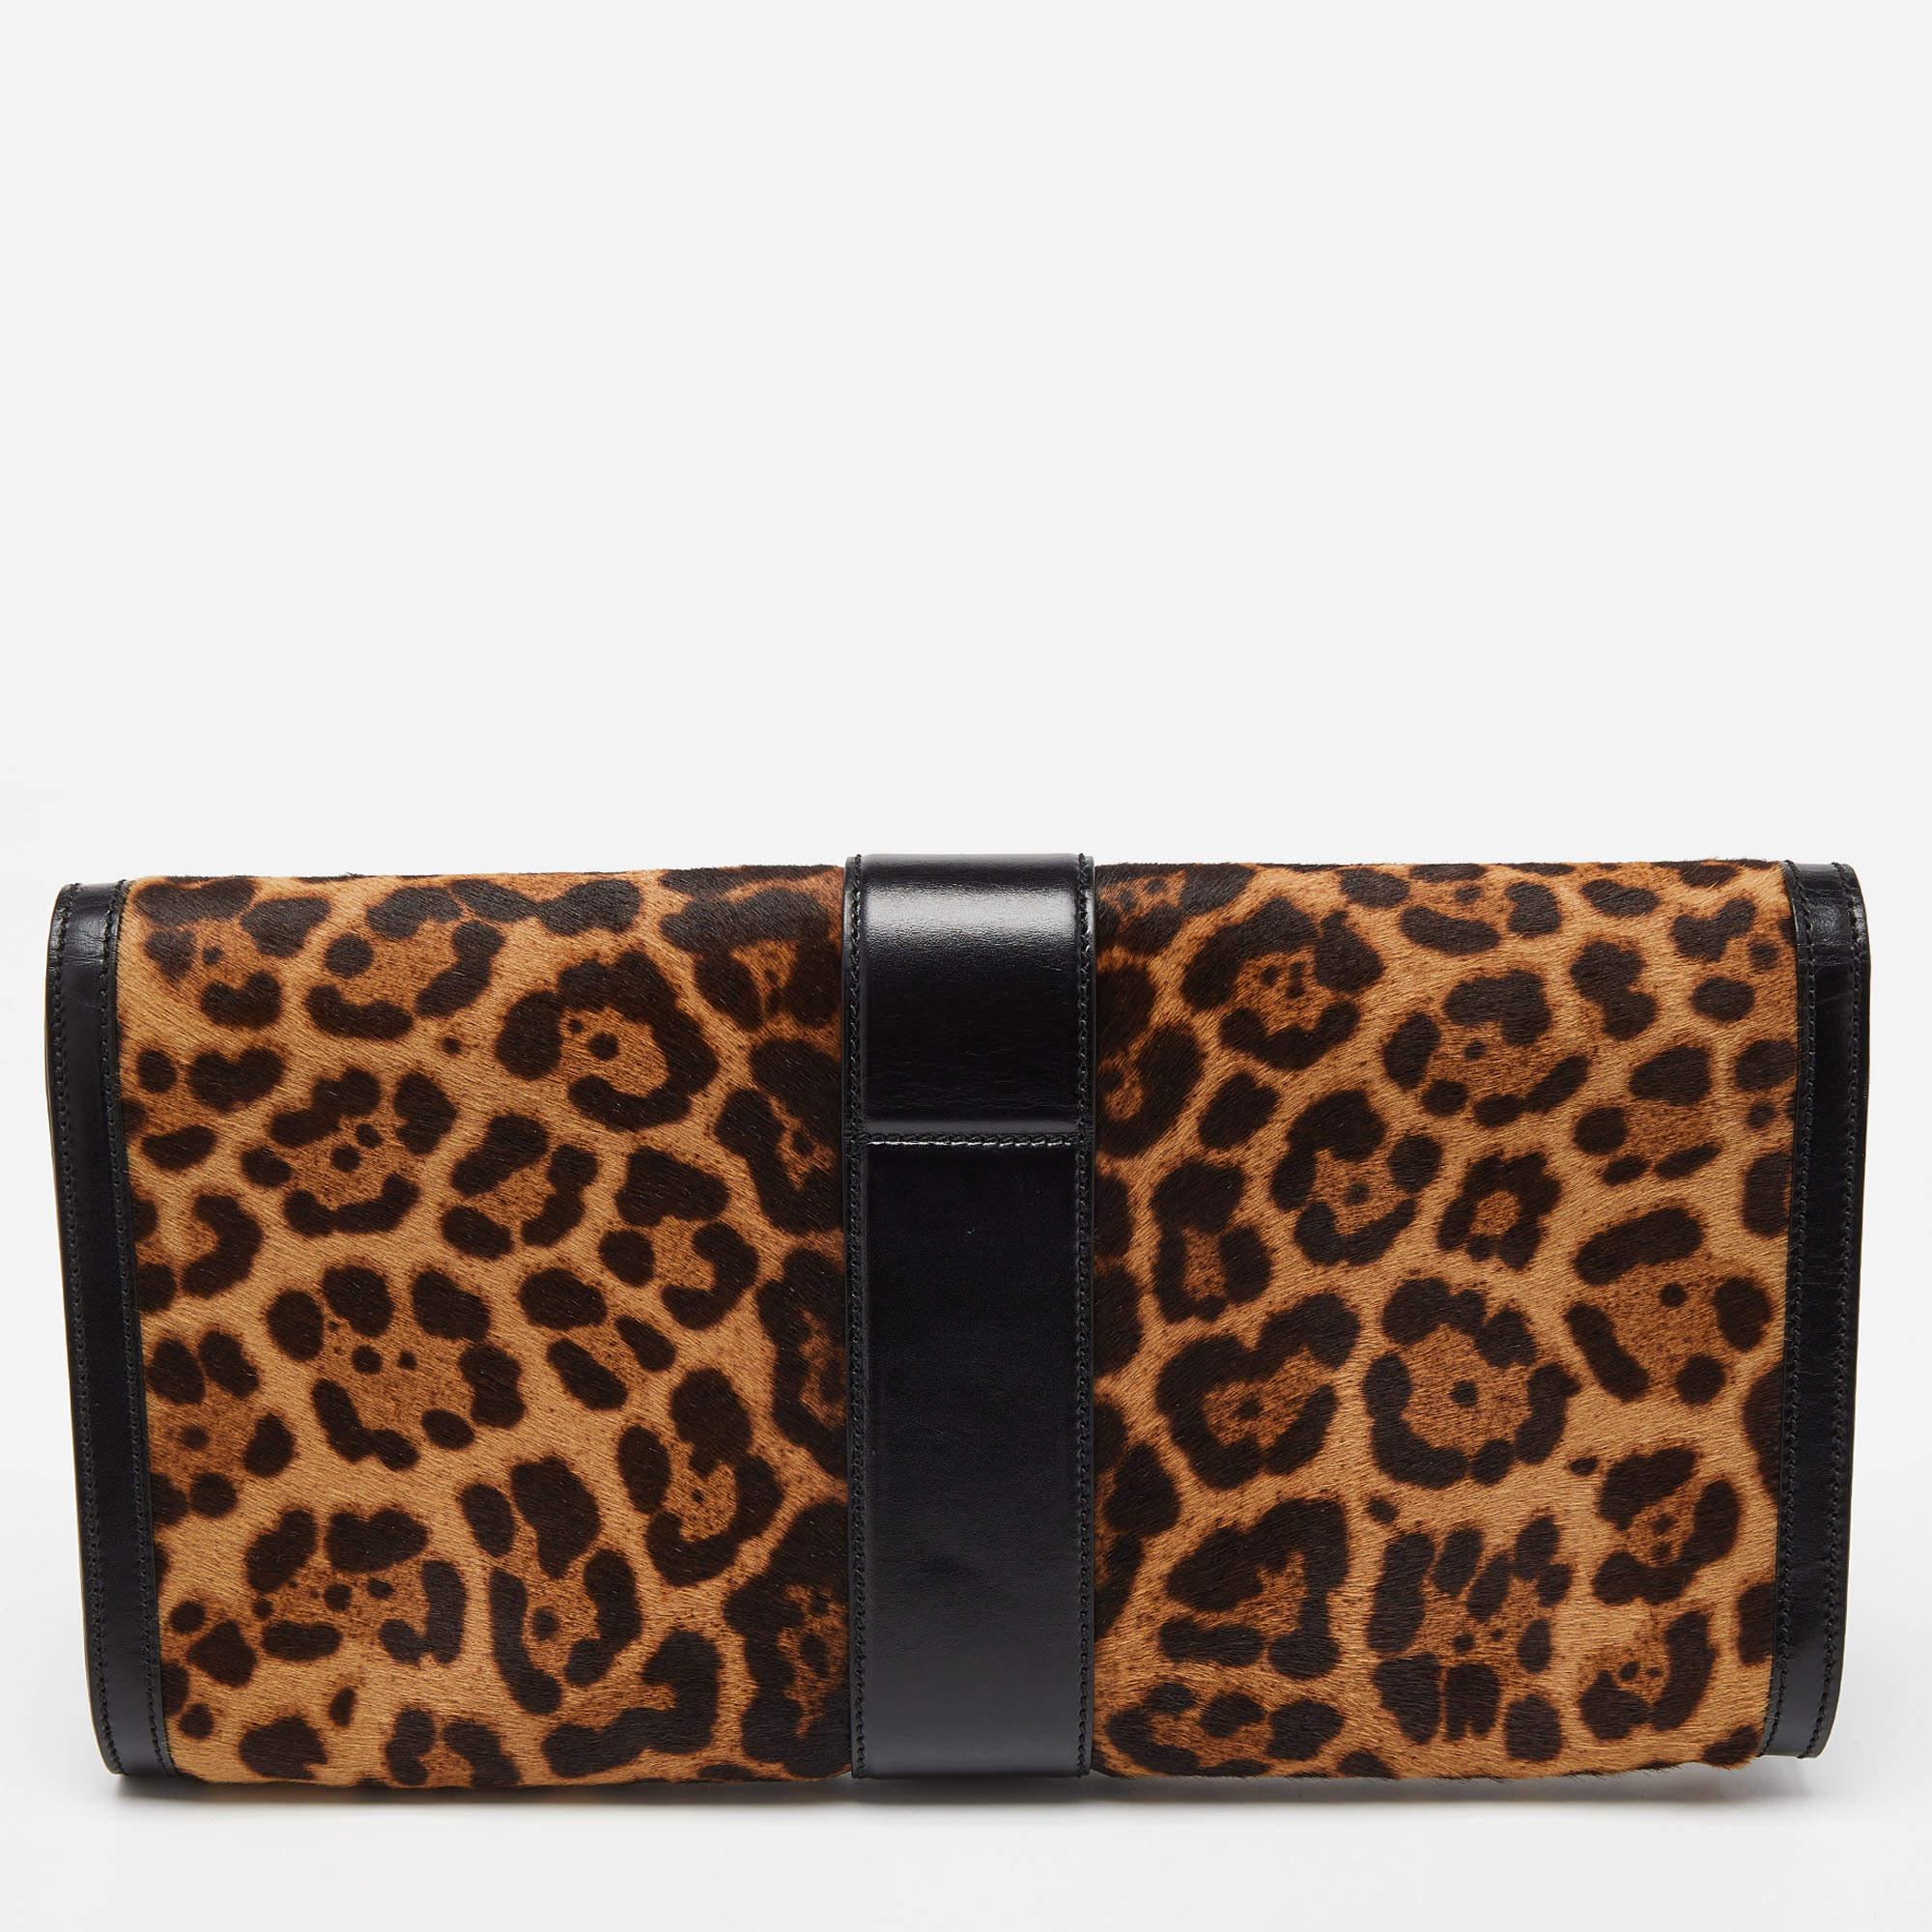 Gucci Brown/Black Leopard Print Calfhair and Leather Lady Buckle Clutch For Sale 1